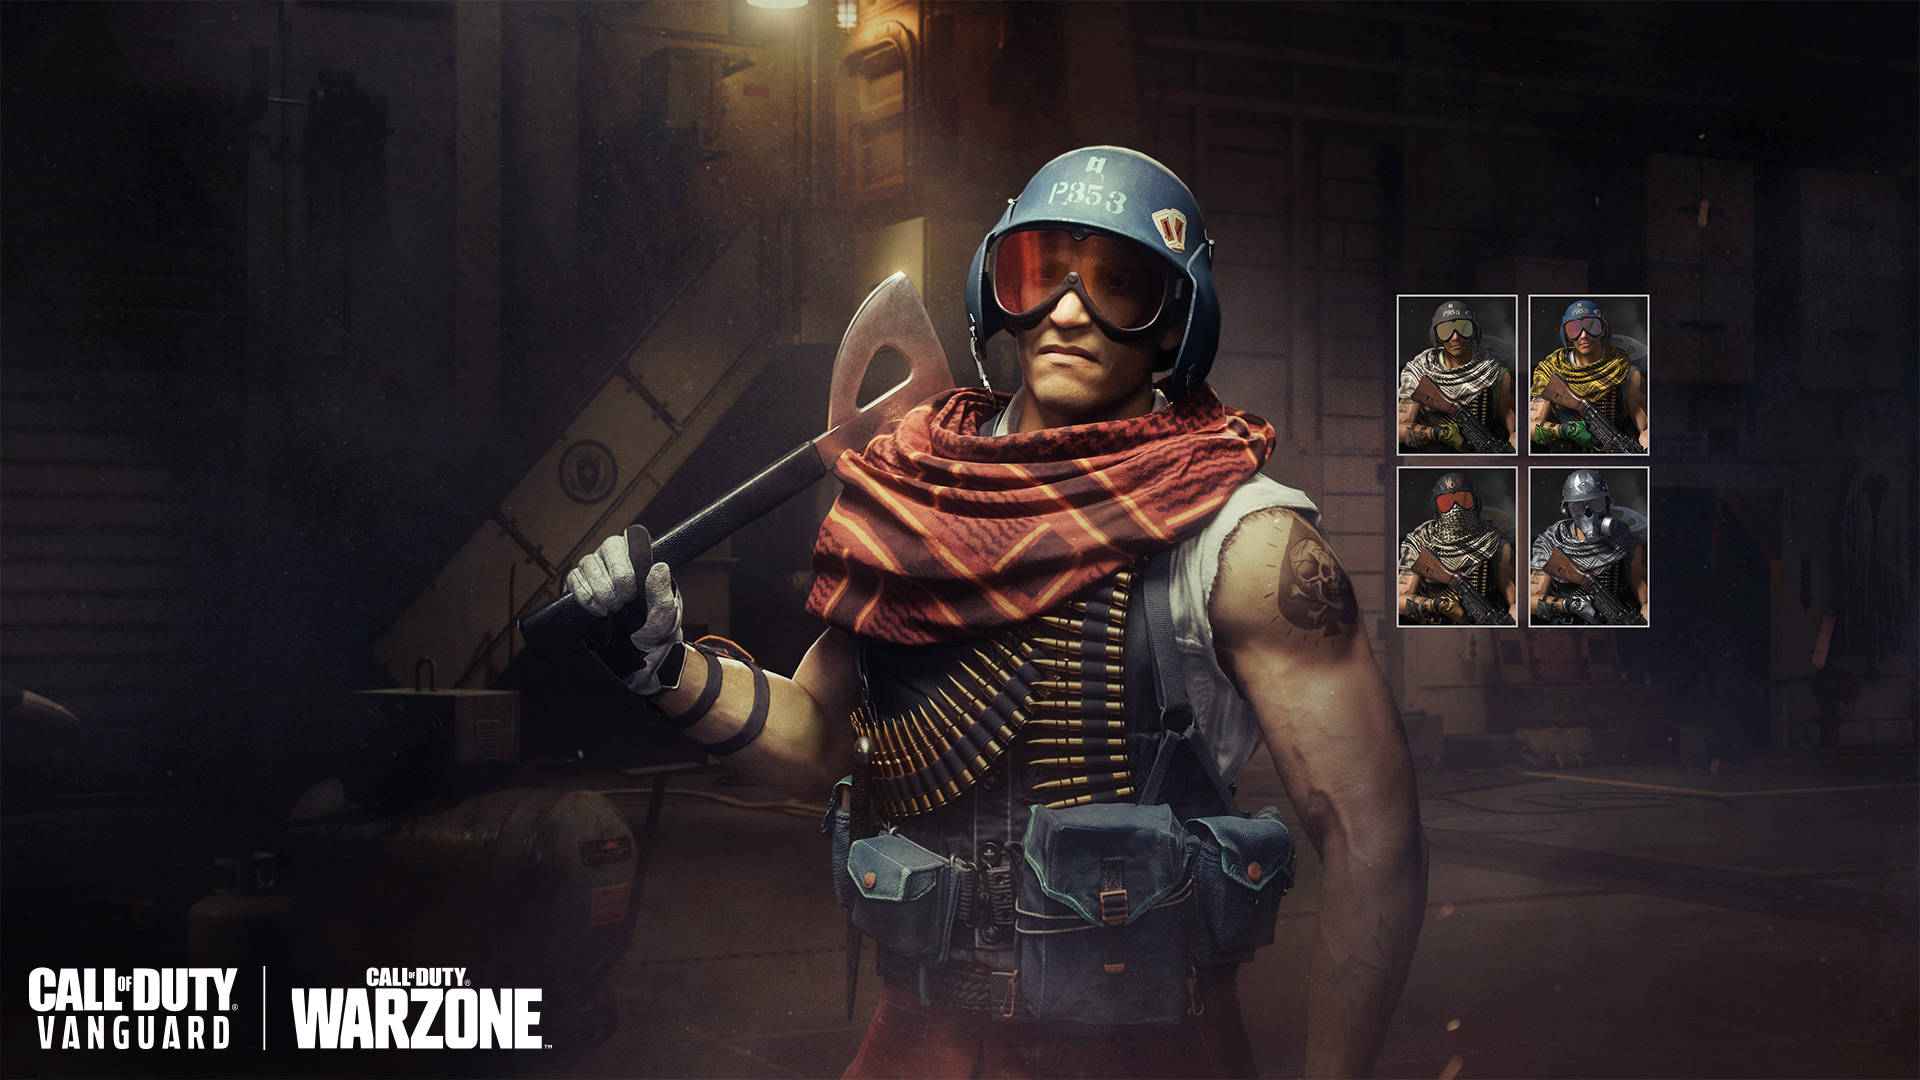 Mateo Hernandez is the new operator in the latest Warzone update